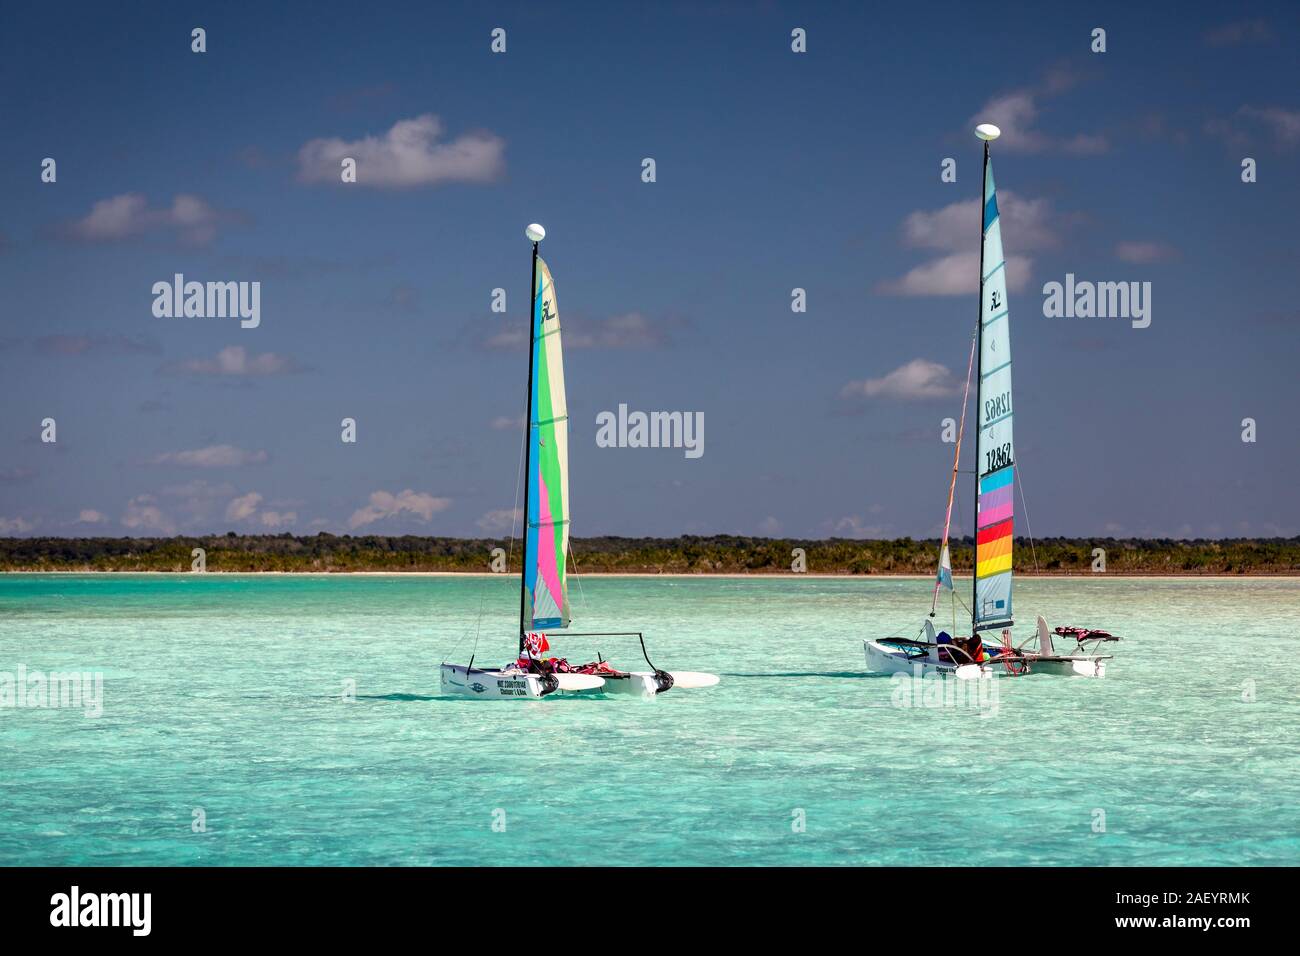 Two sailboats at Pirate's Channel on Lake Bacalar, Quintana Roo, Mexico. Stock Photo